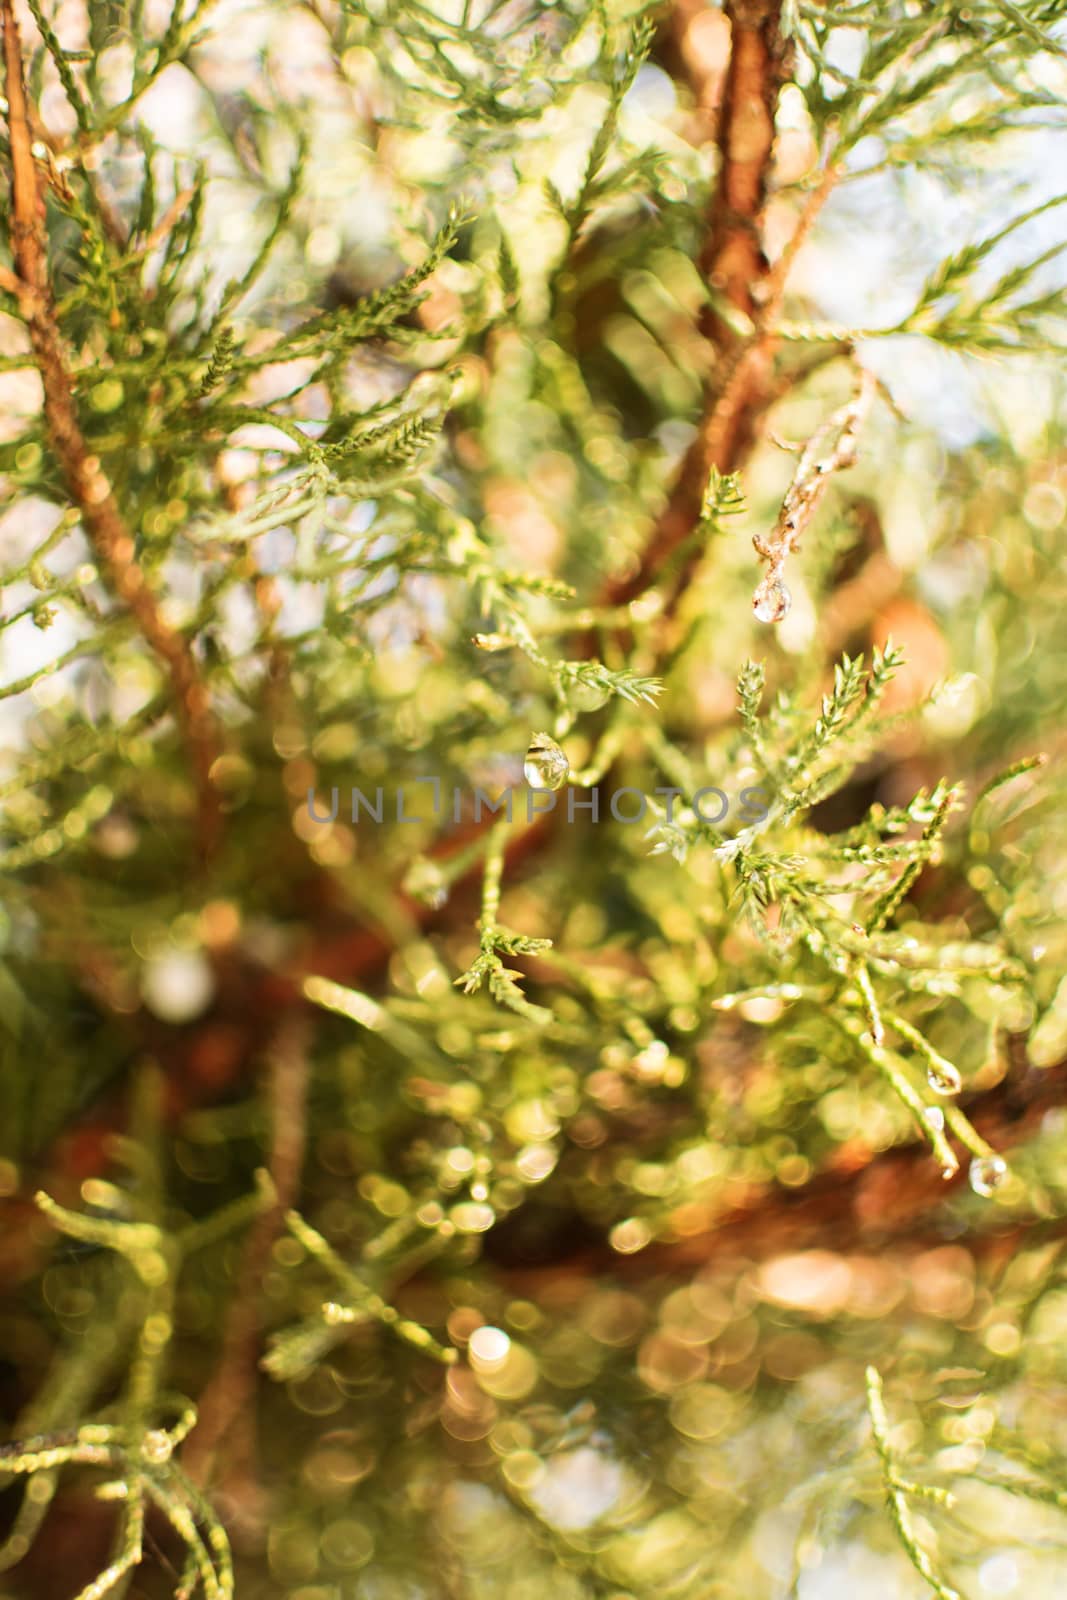 Pine needles and dew drops against the sun by Mendelex